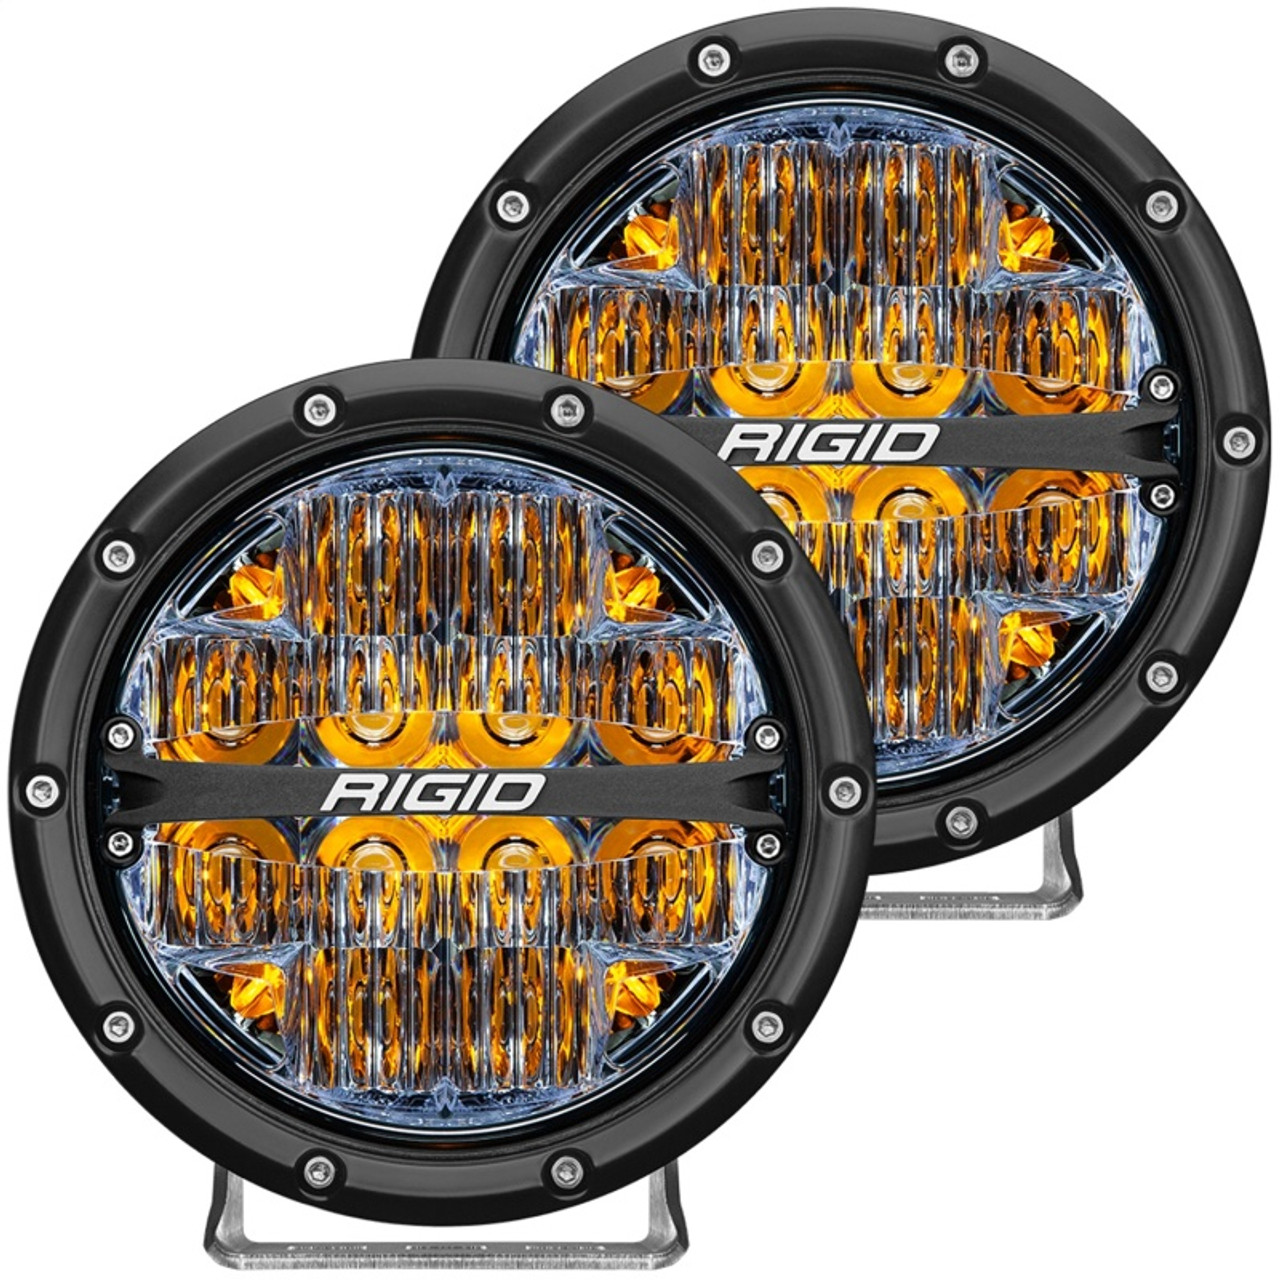 Rigid 360-Series 6IN LED Lights With Amber Backlight (Drive)